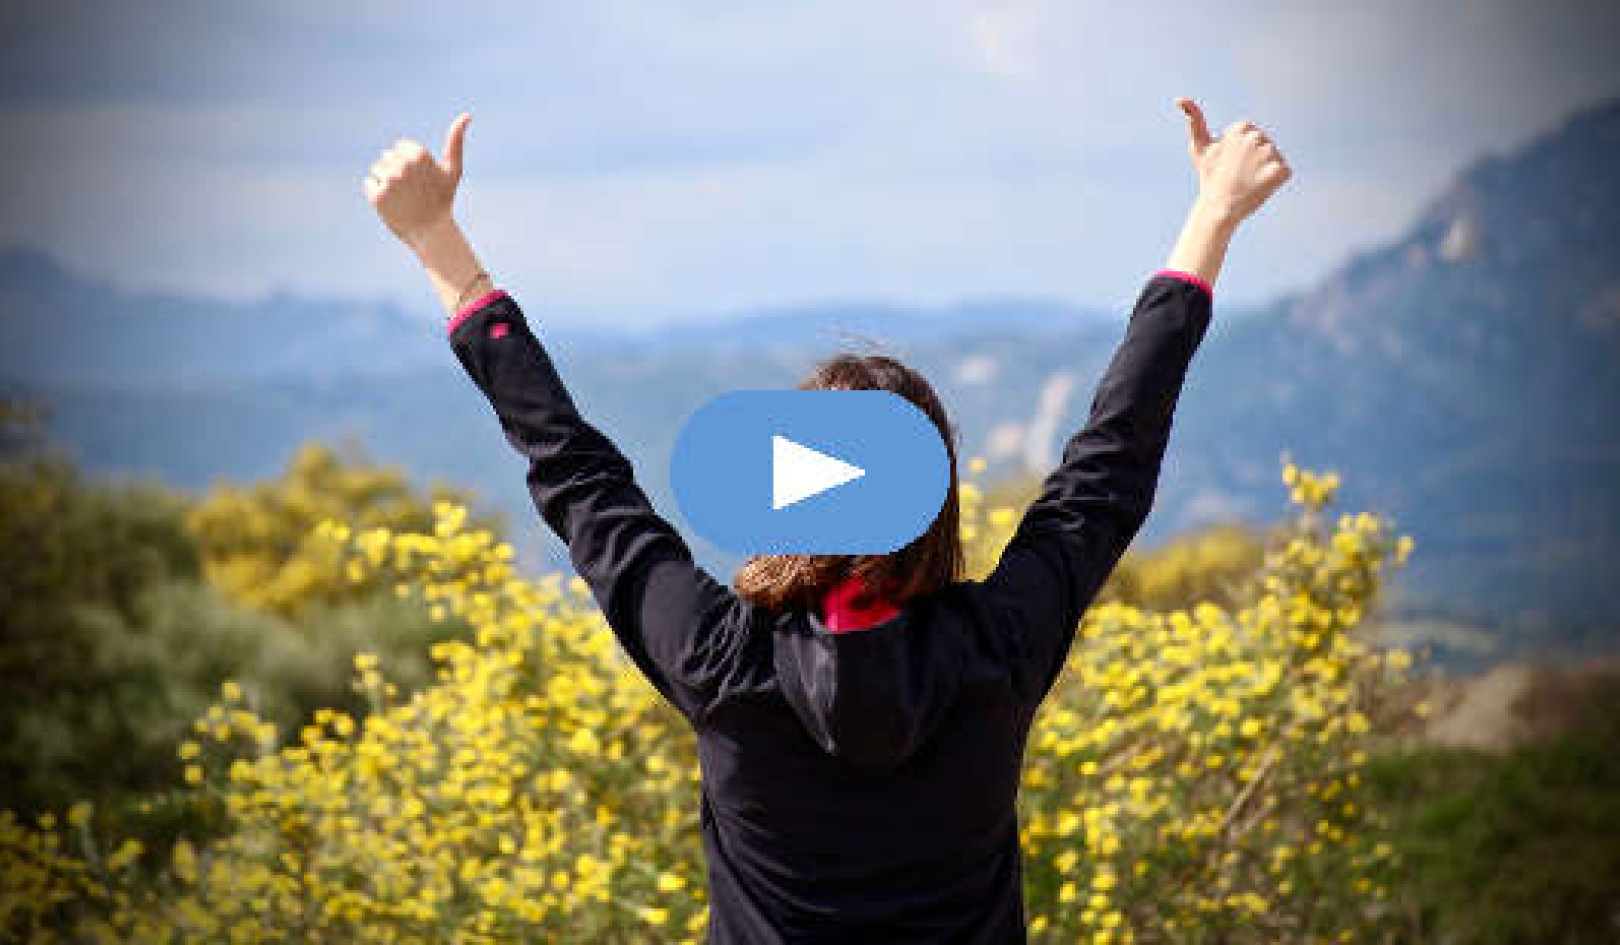 How To Walk The Fearless Path (Video)